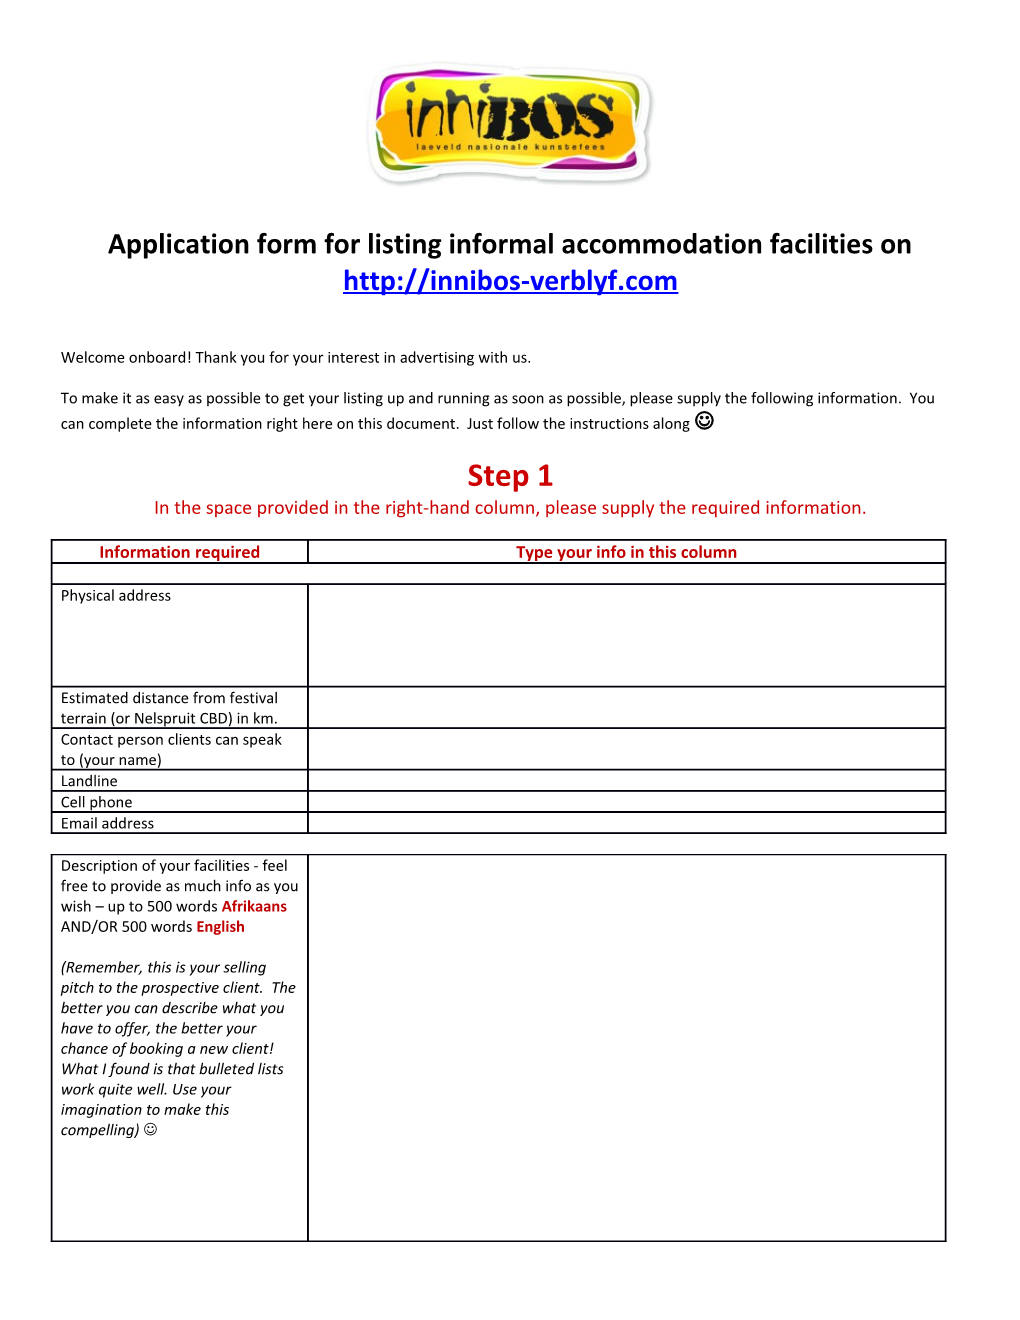 Application Form for Listing Informal Accommodation Facilities On